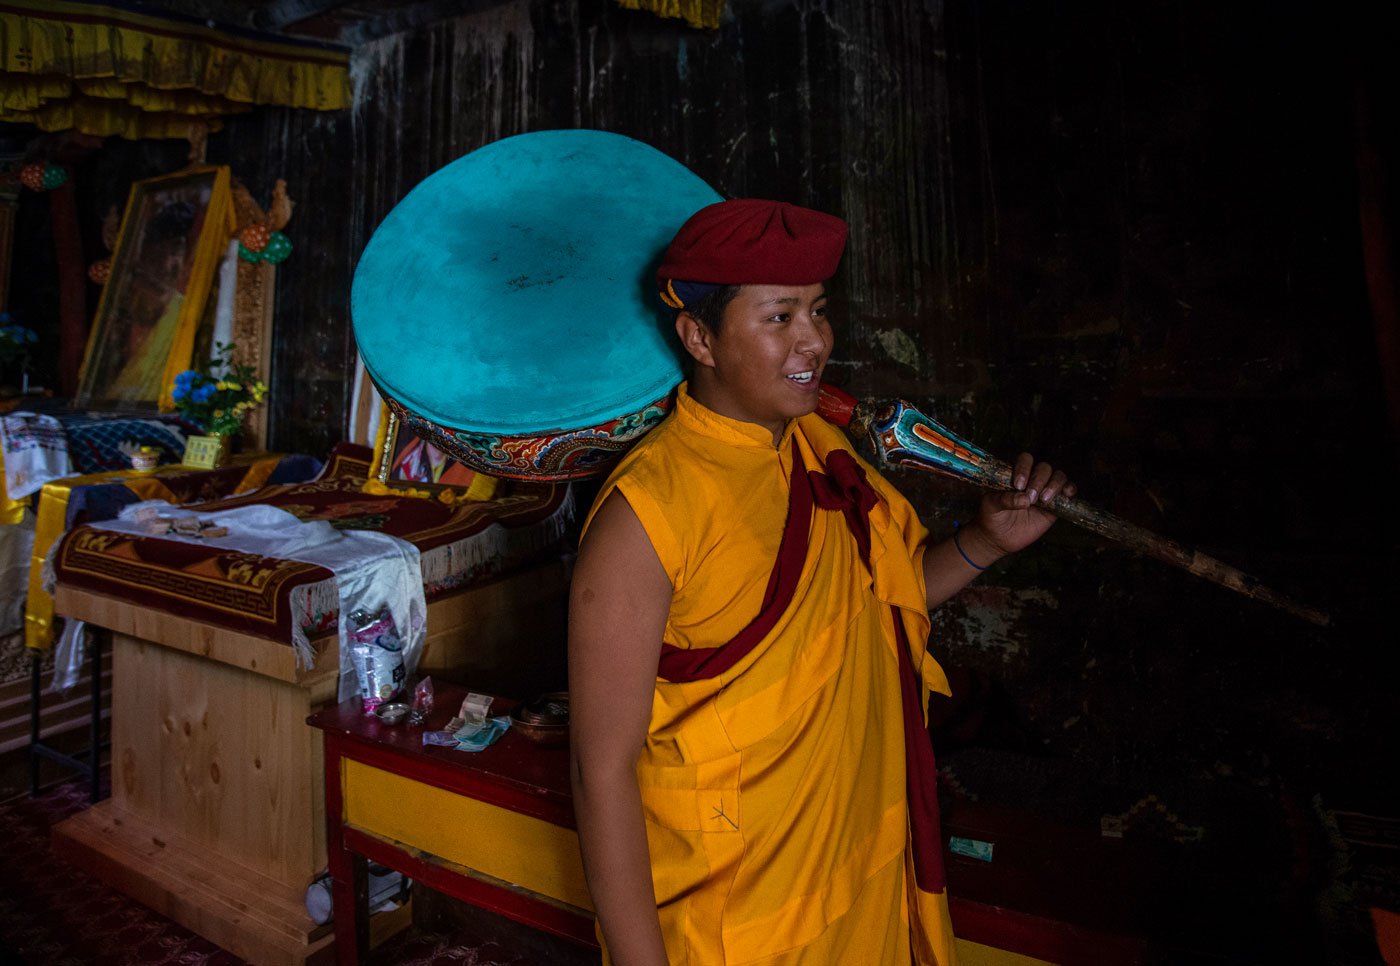 Lama Dorje Tesring holding a traditional musical instrument called ang